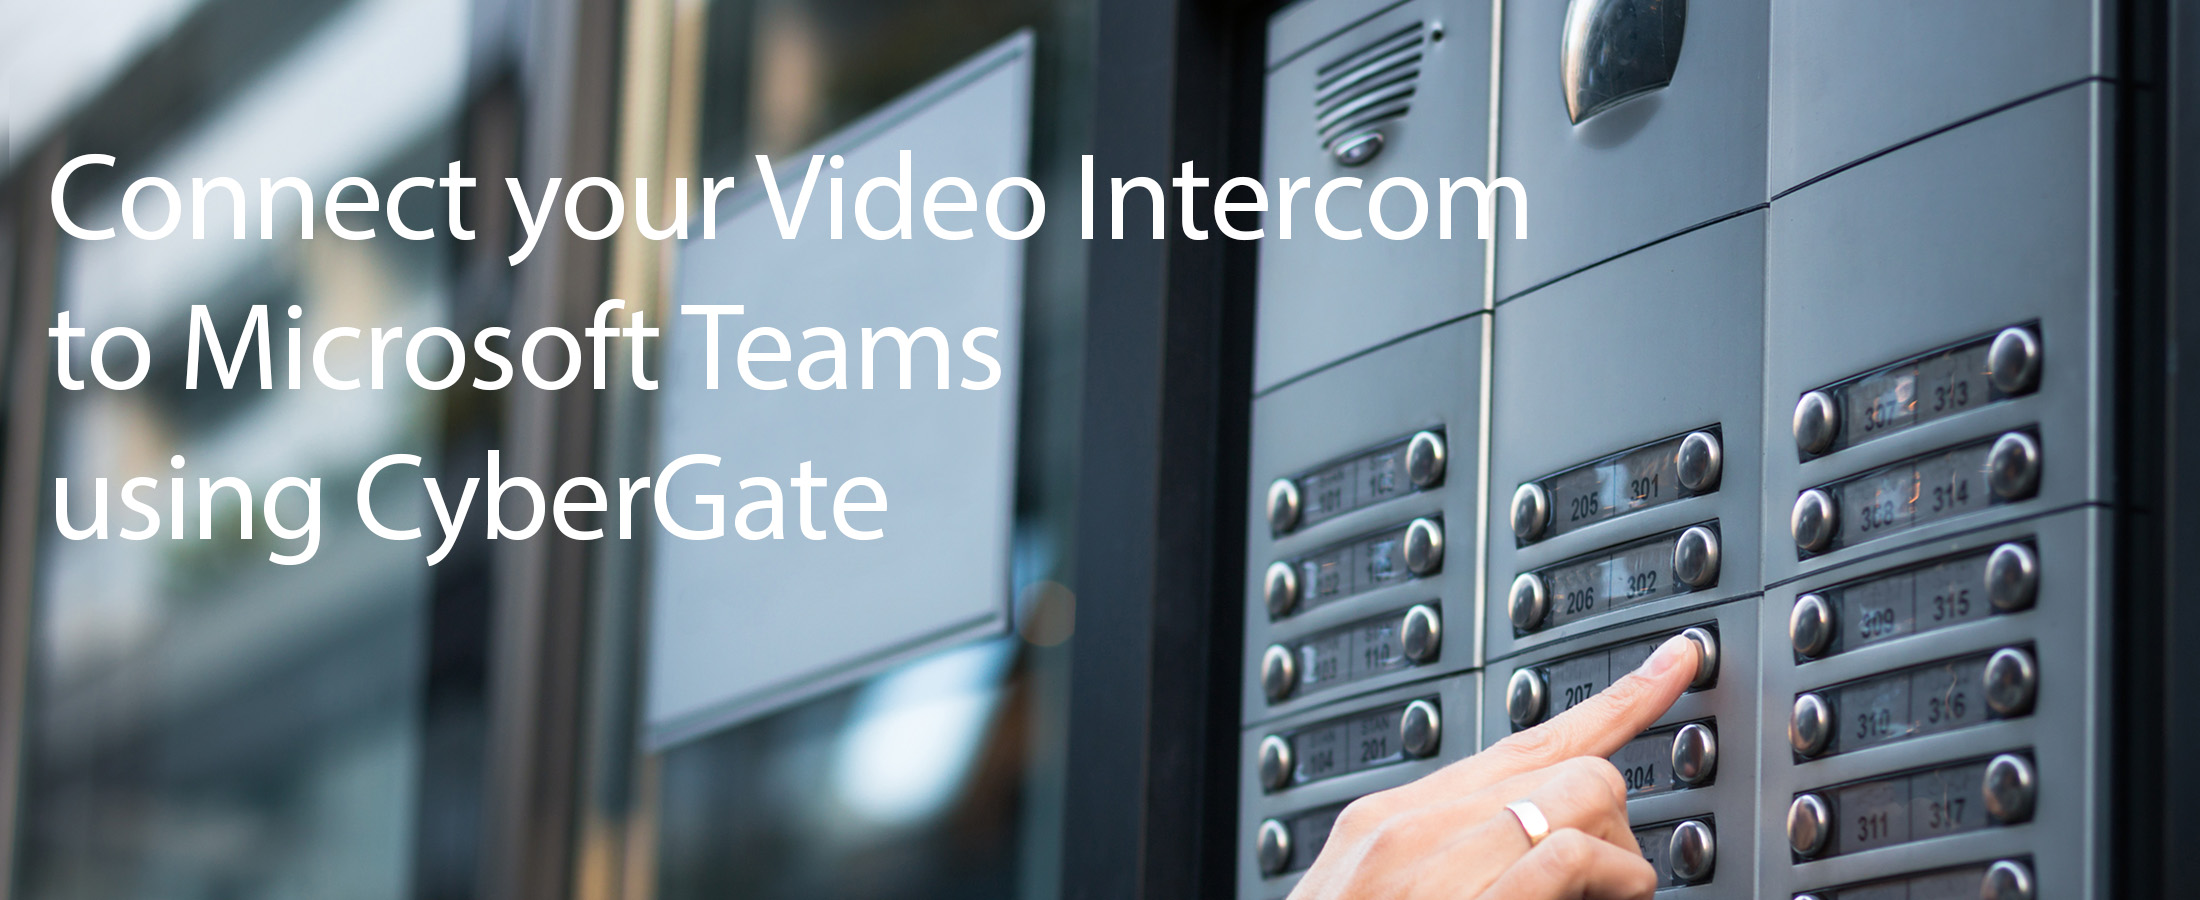 Connect video intercom to Microsoft Teams with Cybergate